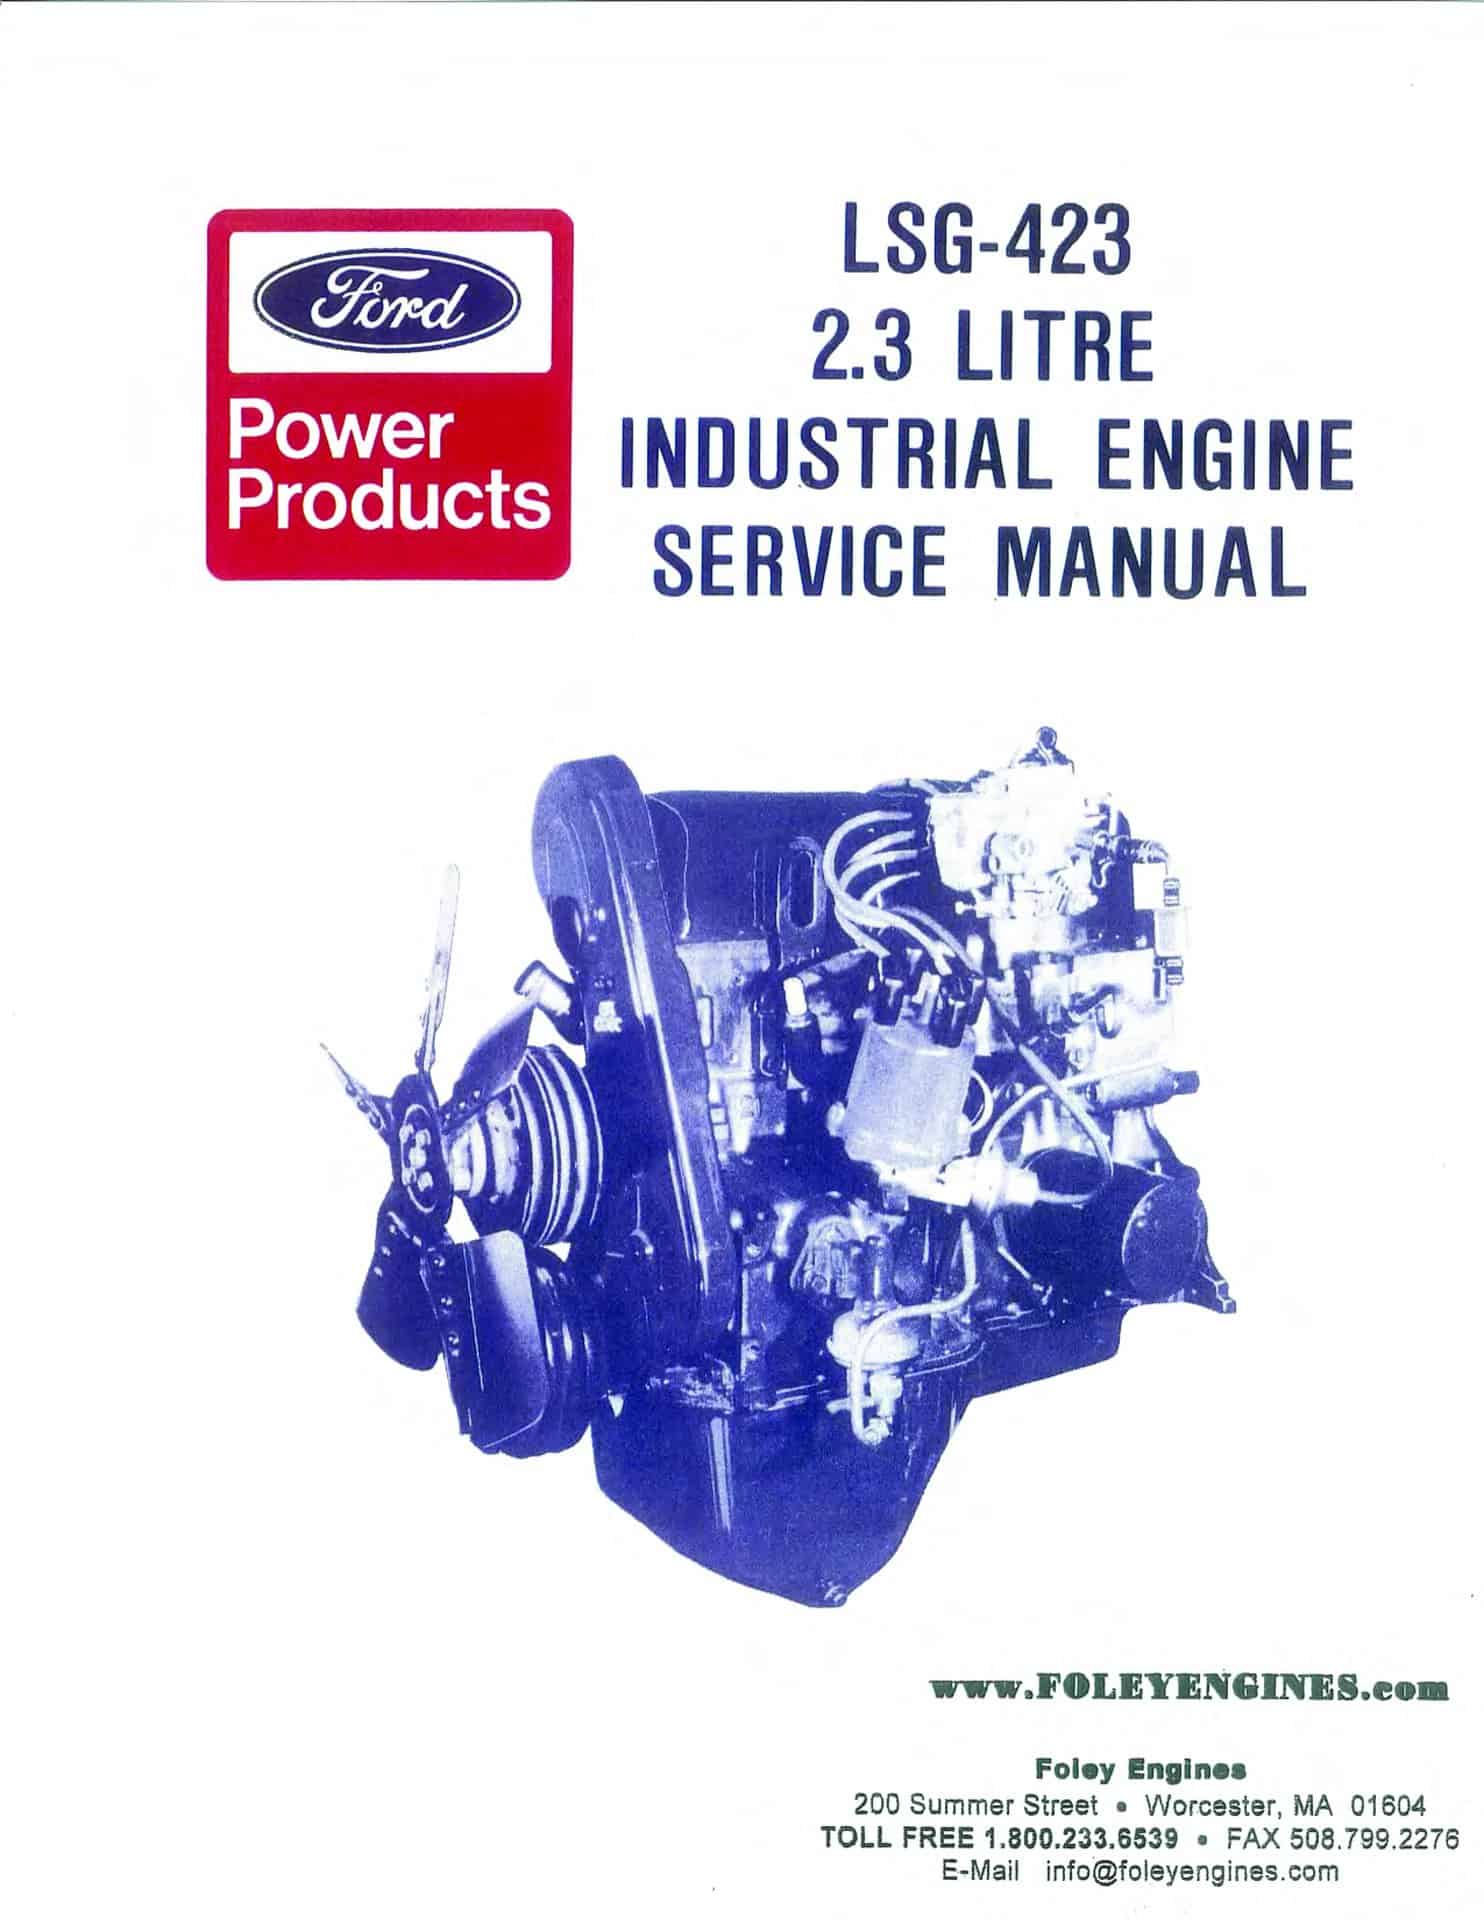 Ford LSG423 Service Manual